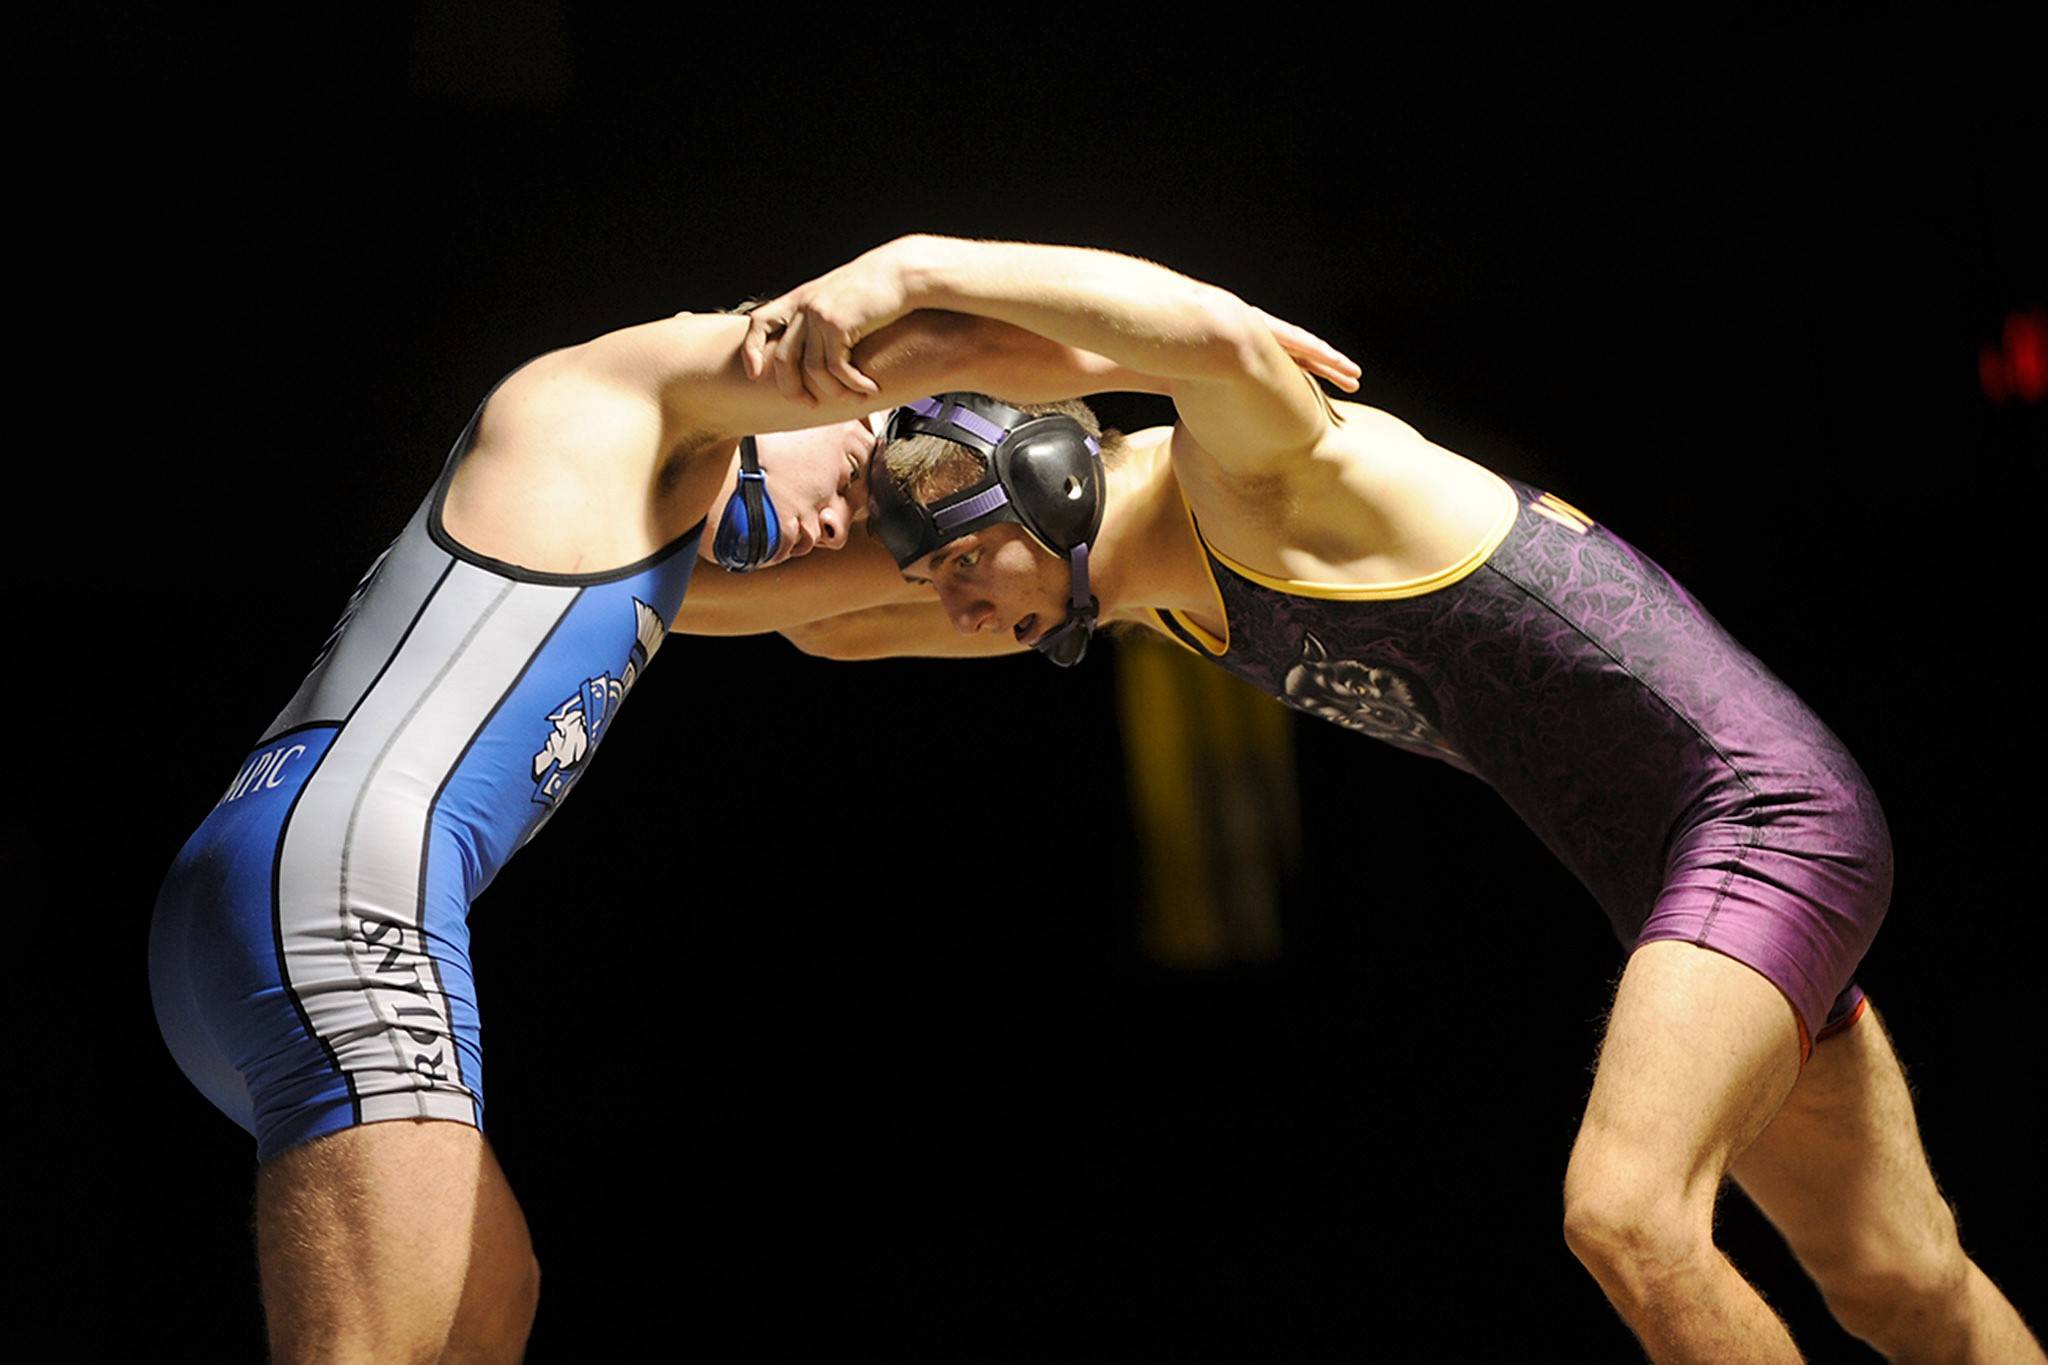 Olympic’s Taylor Andrews, left, and Sequim’s Chris Puksta had a close match on Jan. 11 with Puksta coming close to a pin in the second period and narrowing his deficit to 9-7. Andrews pulled ahead in the third period though and won 12-7. Sequim Gazette photo by Matthew Nash